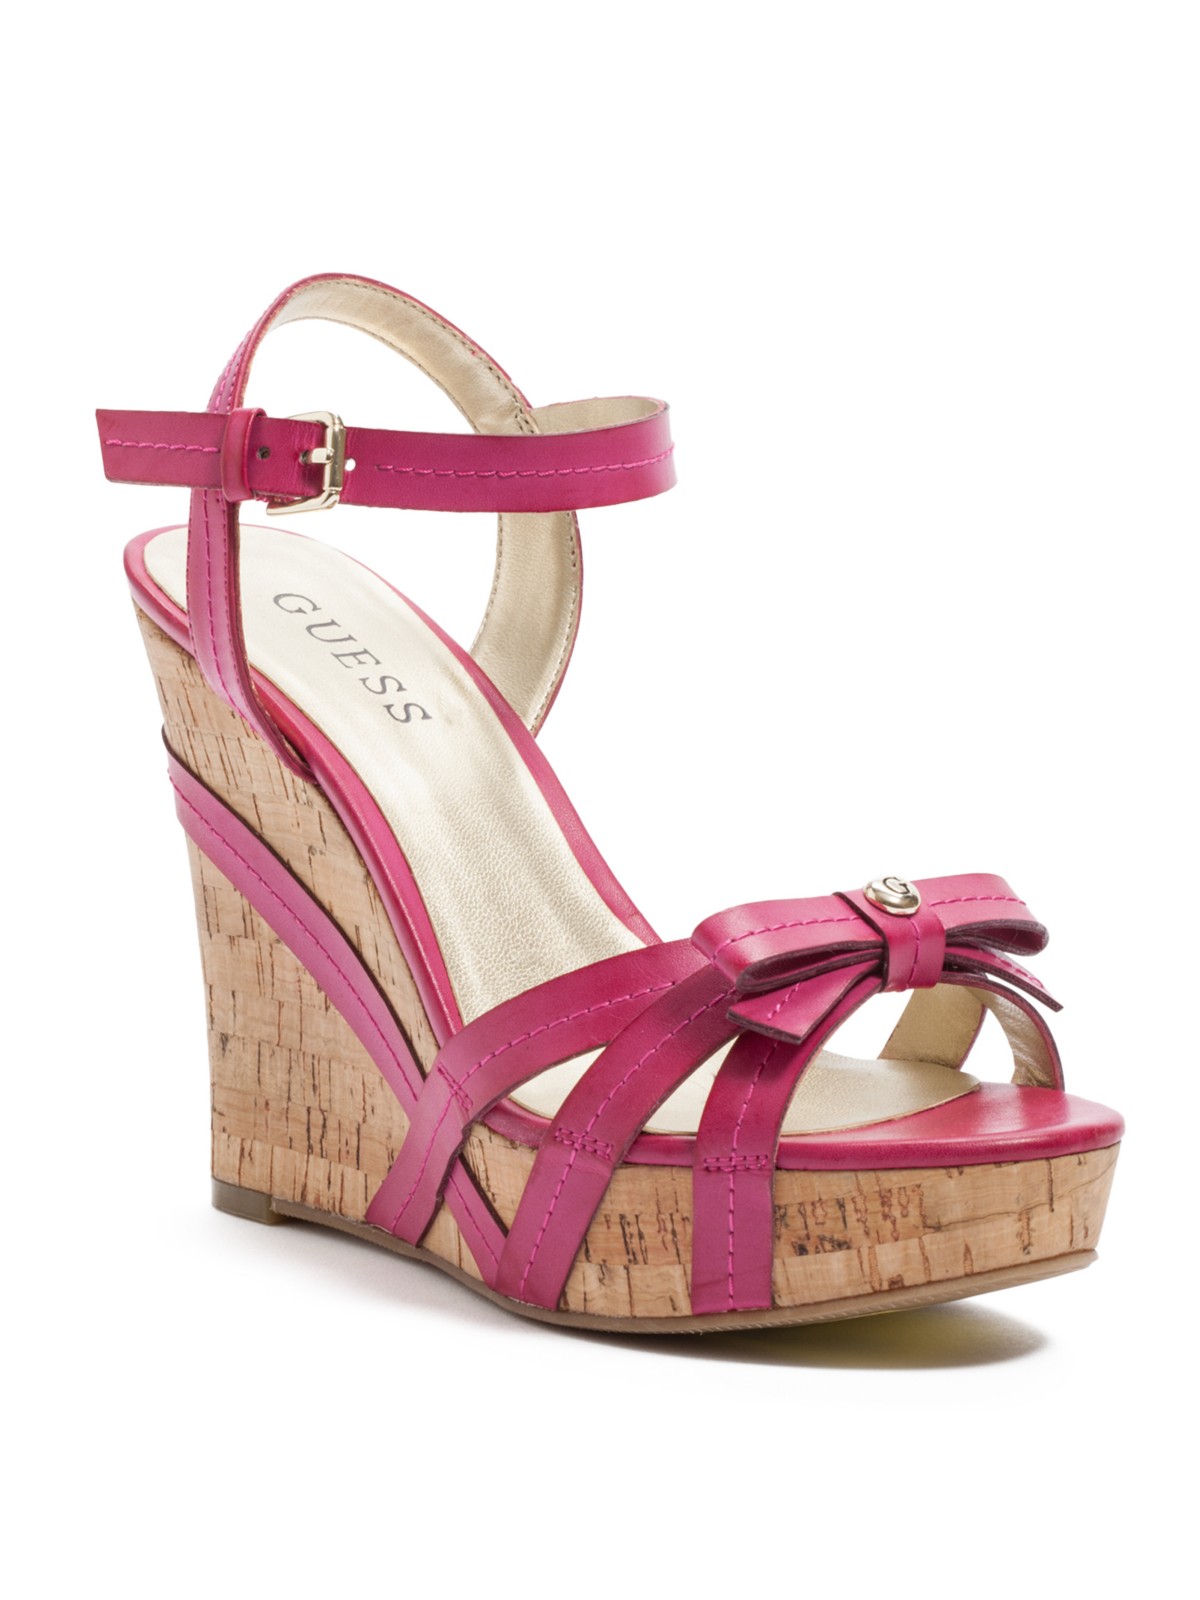 GUESS Topsy Open-Toe Wedge Sandals | eBay